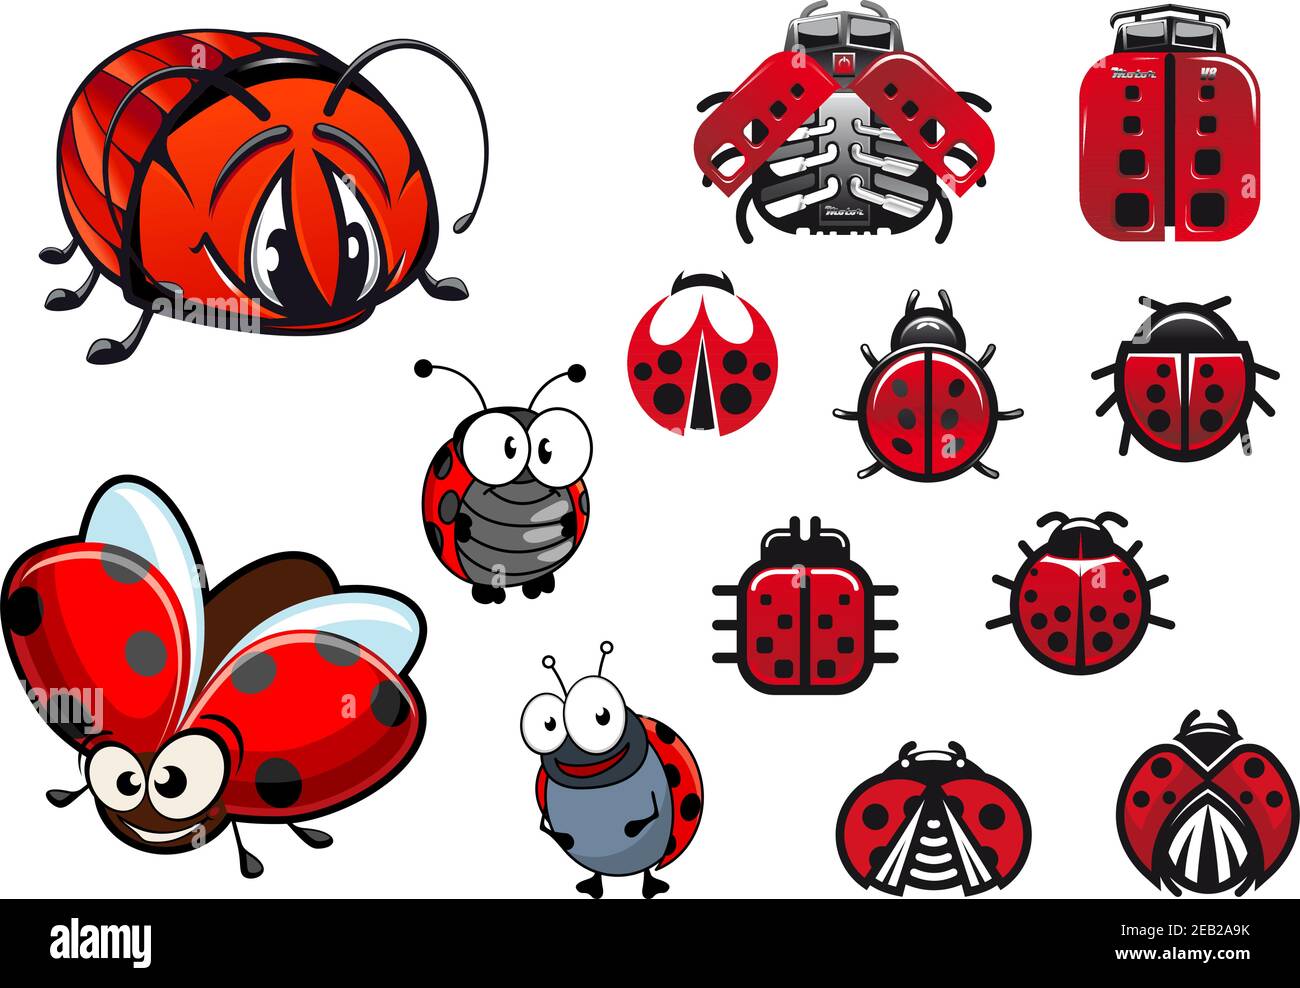 Ladybugs, ladybirds and beetles with happy cartoon flying and crawling beetles, abstract glossy ladybirds icons and modern machinery stylized ladybugs Stock Vector